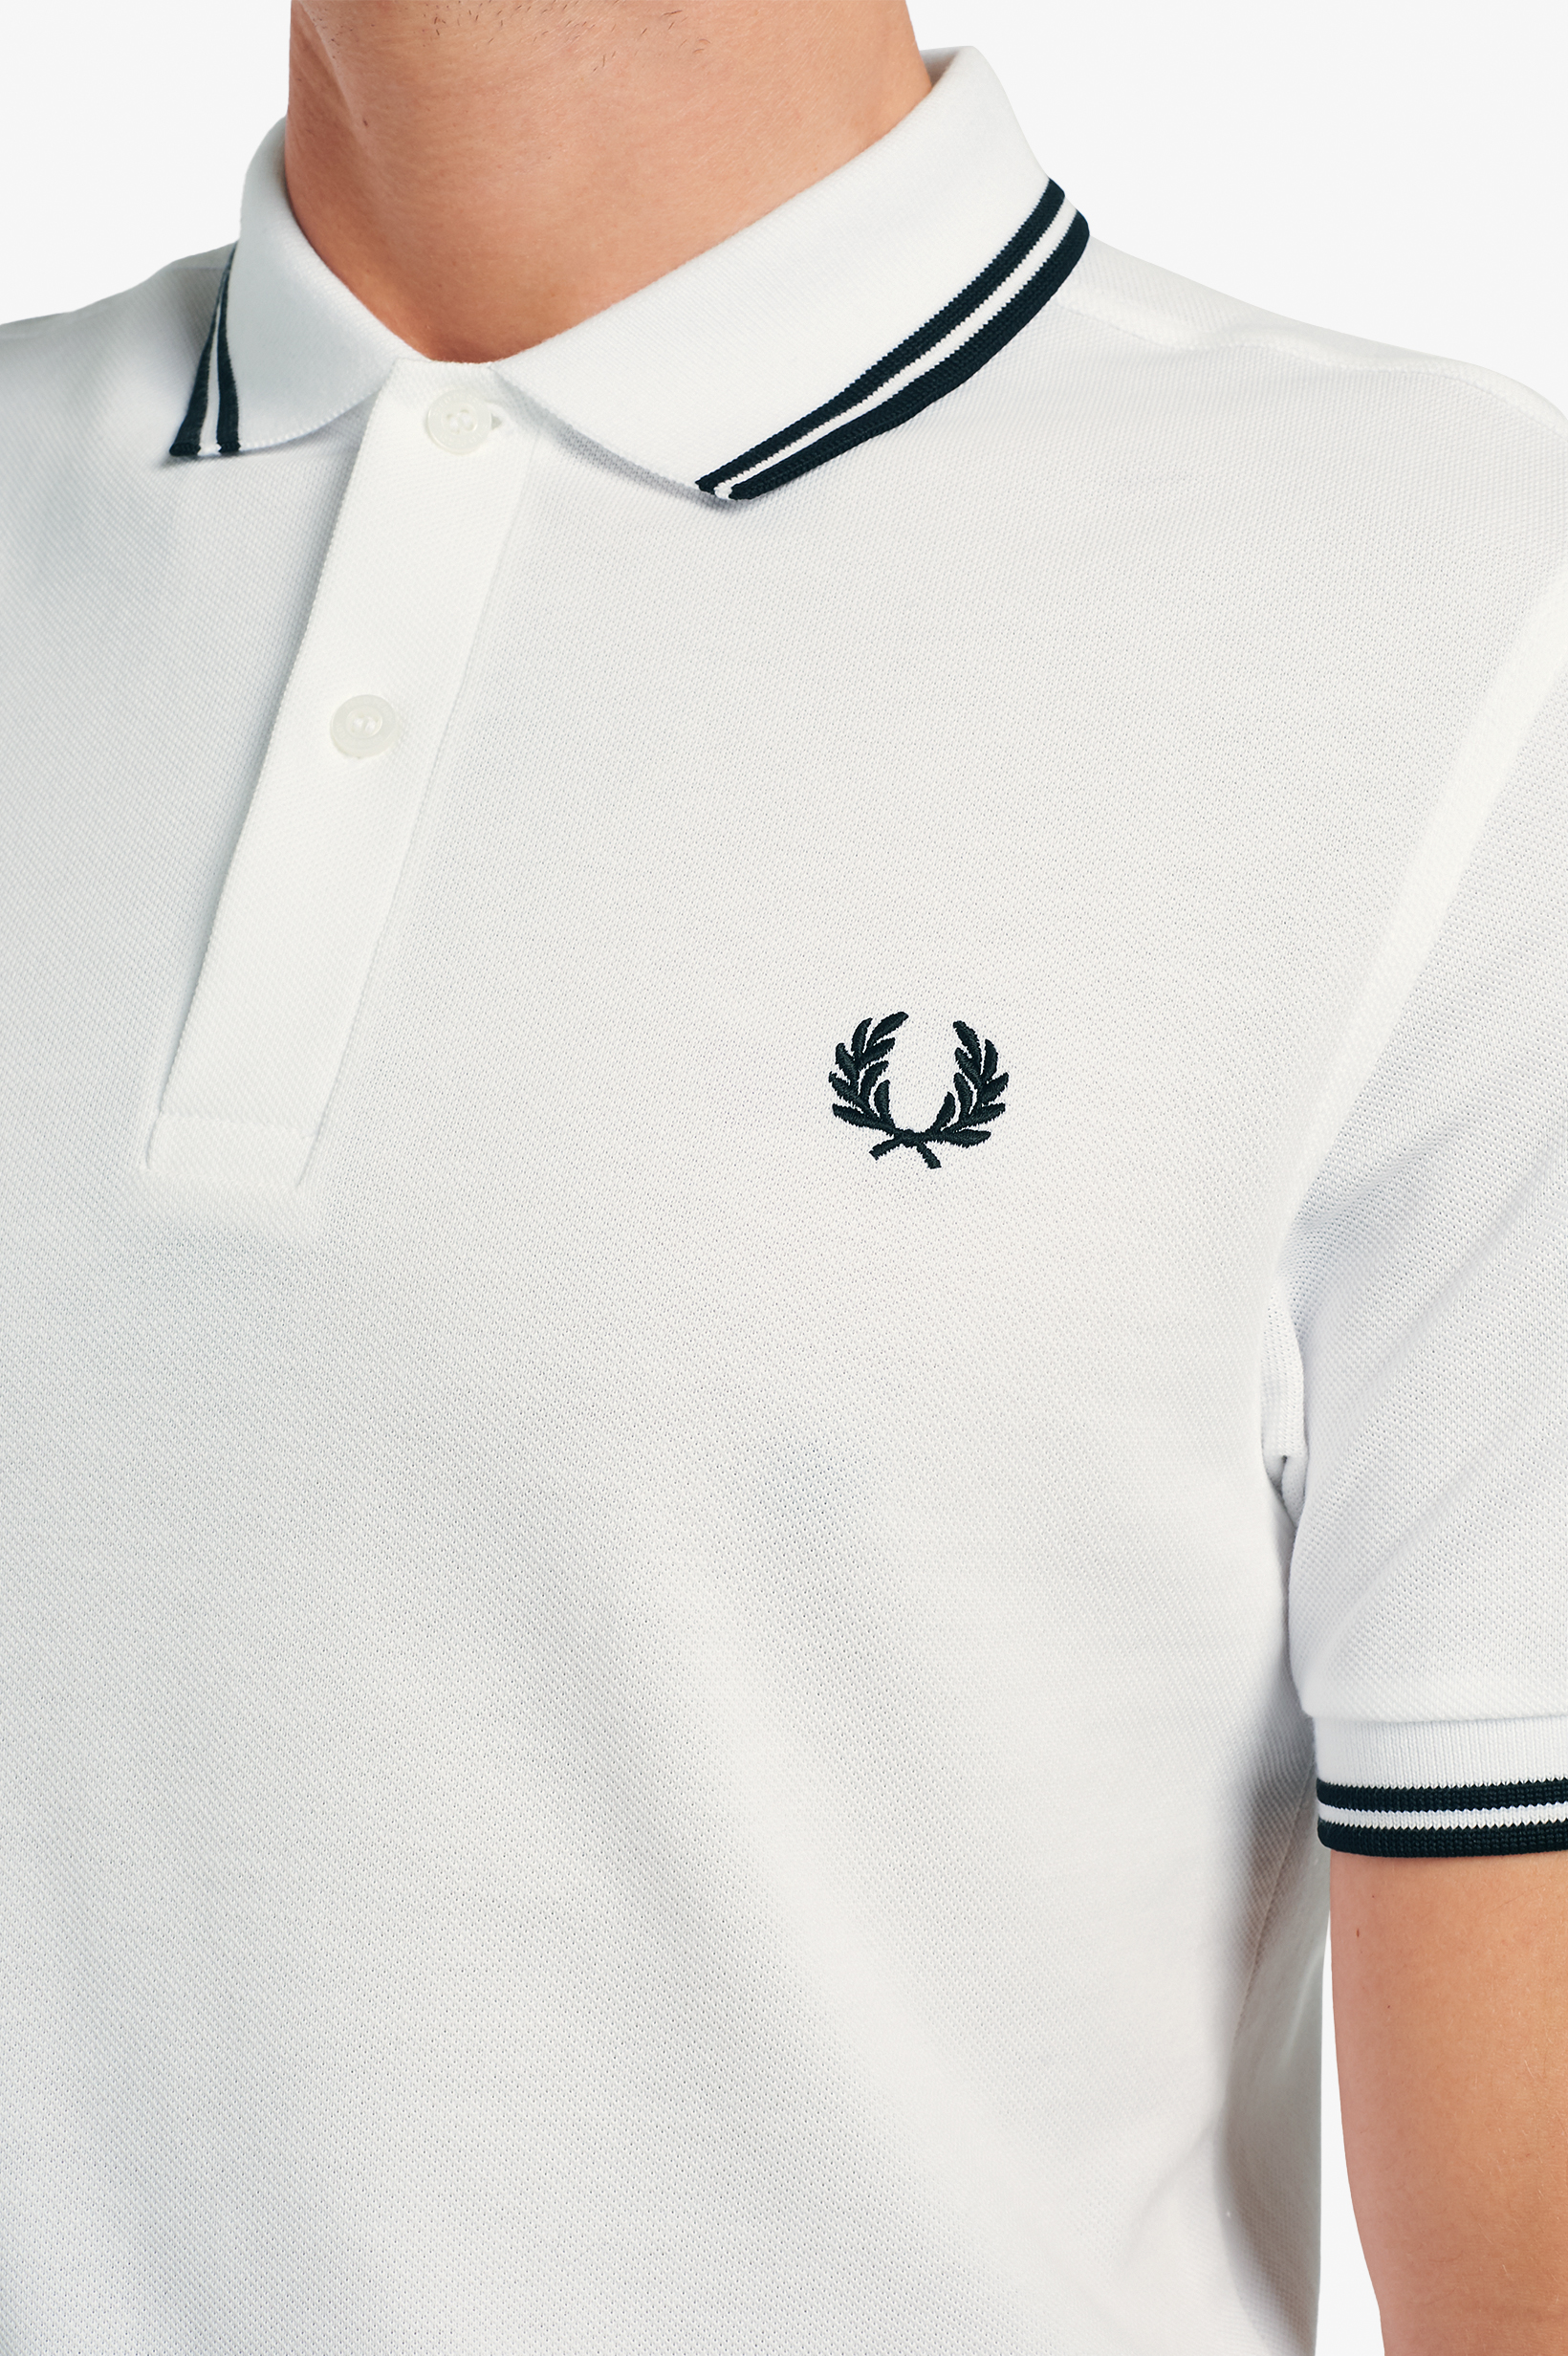 Fred Perry - TWIN TIPPED POLO SHIRT - White/Black/Black